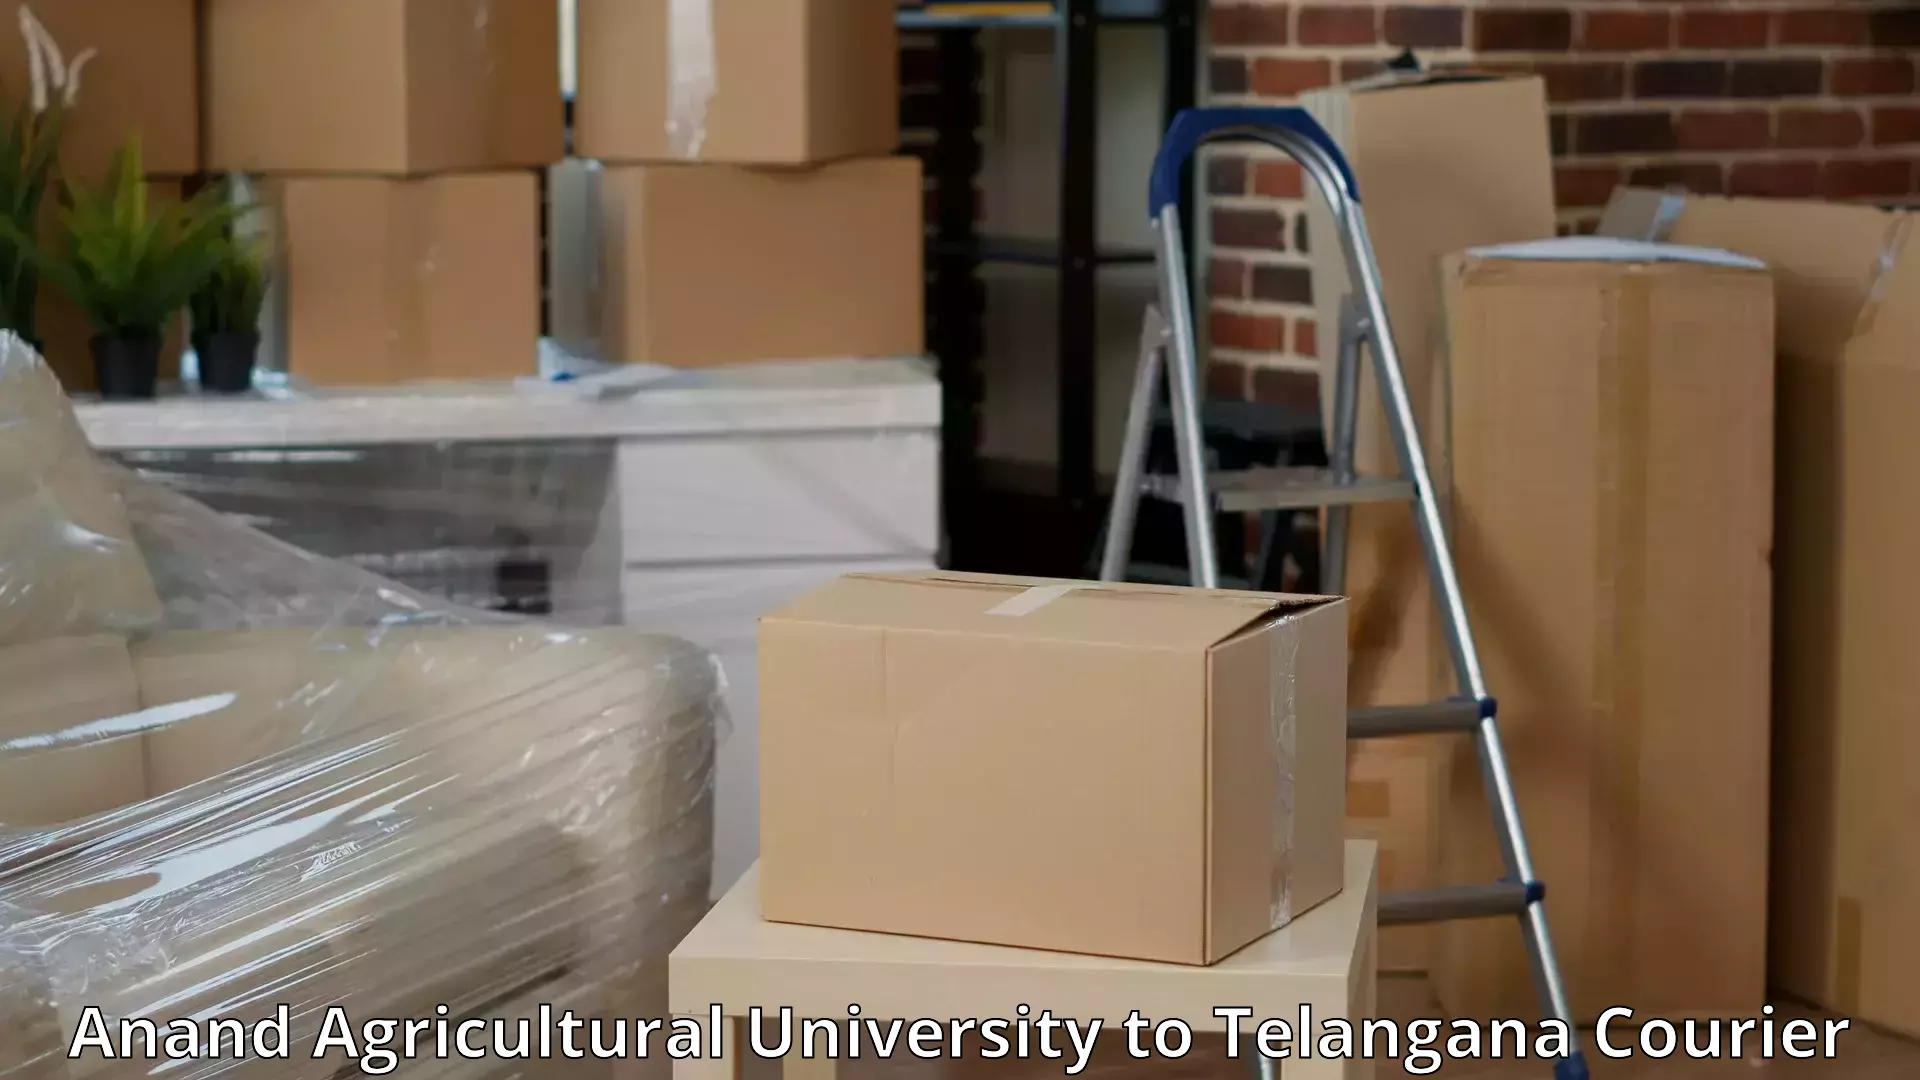 Quality relocation services in Anand Agricultural University to Kaghaznagar